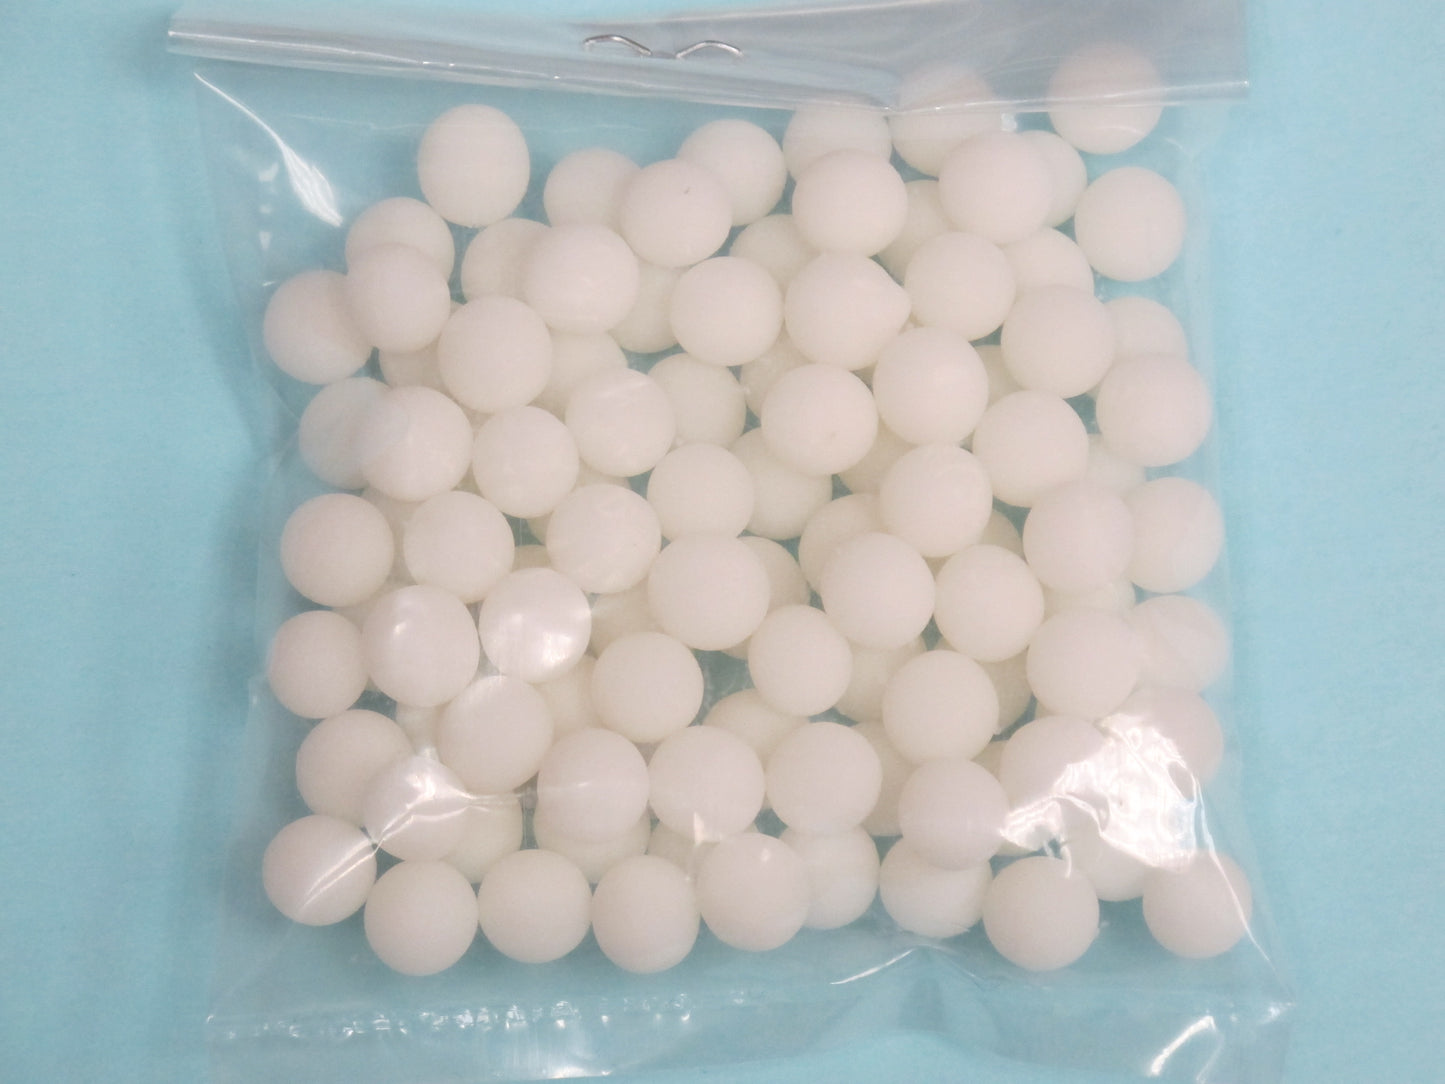 White/Ivory Sugar Pearls NOT Pearlized 8mm 1/10th lb